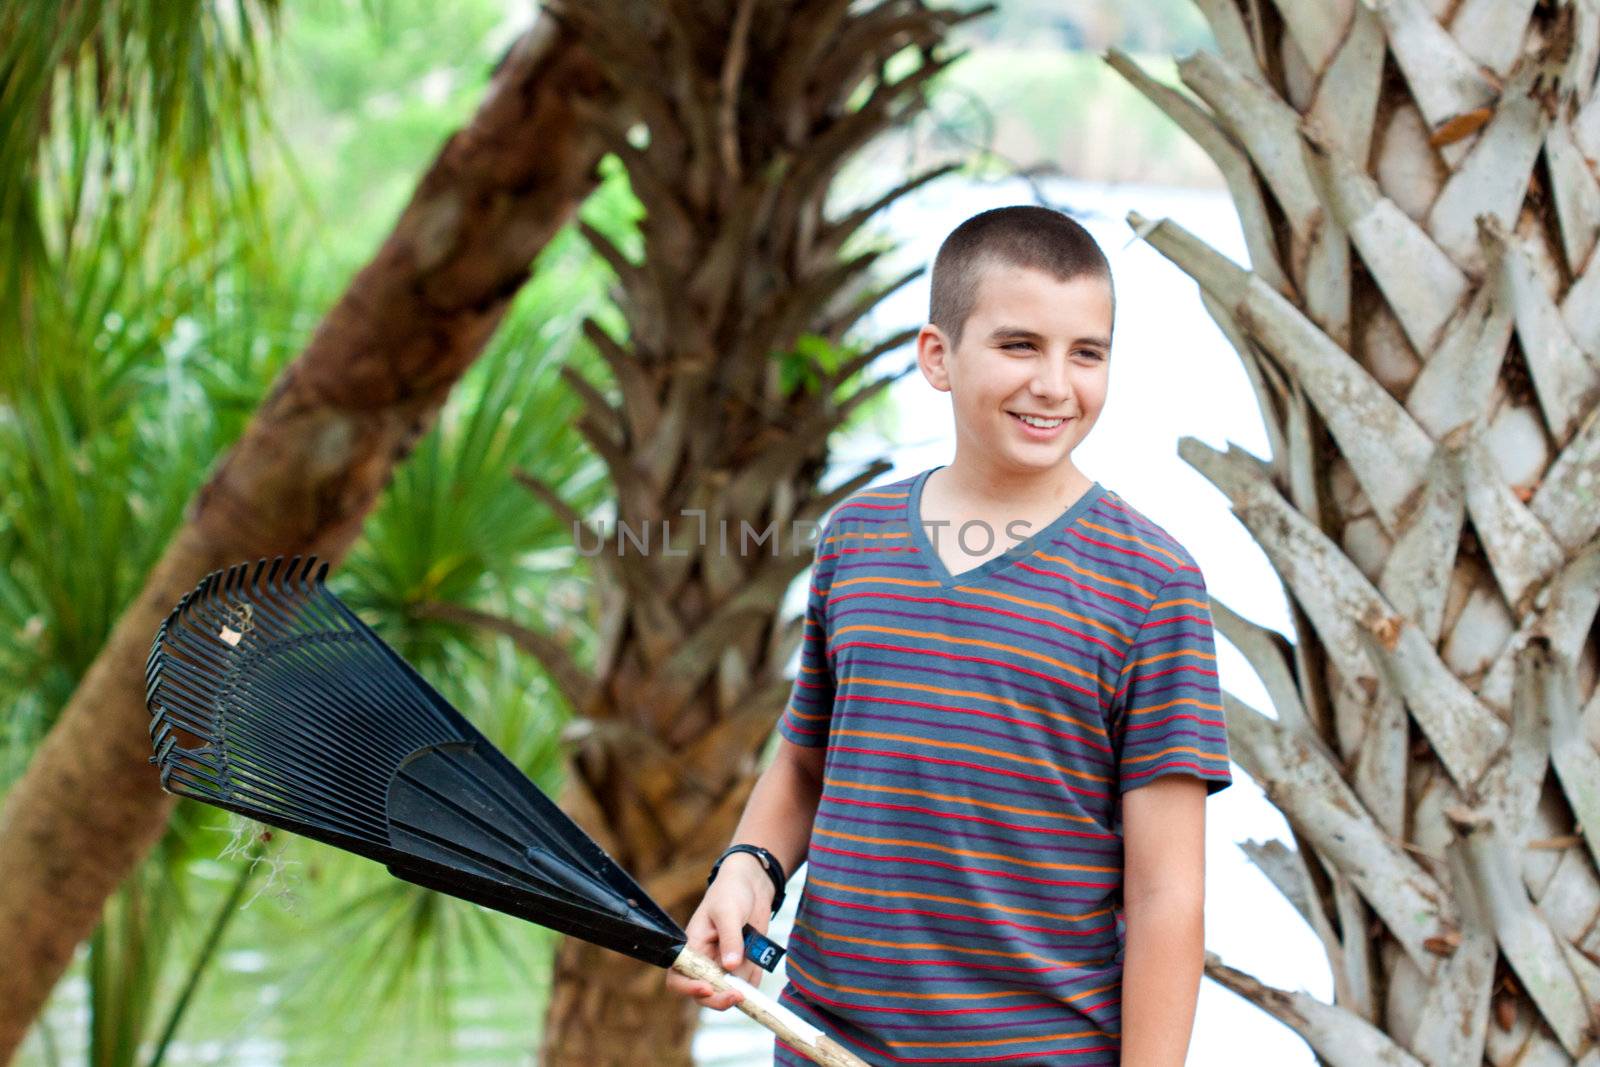 Boy outdoors with a rake smiling and having a good time